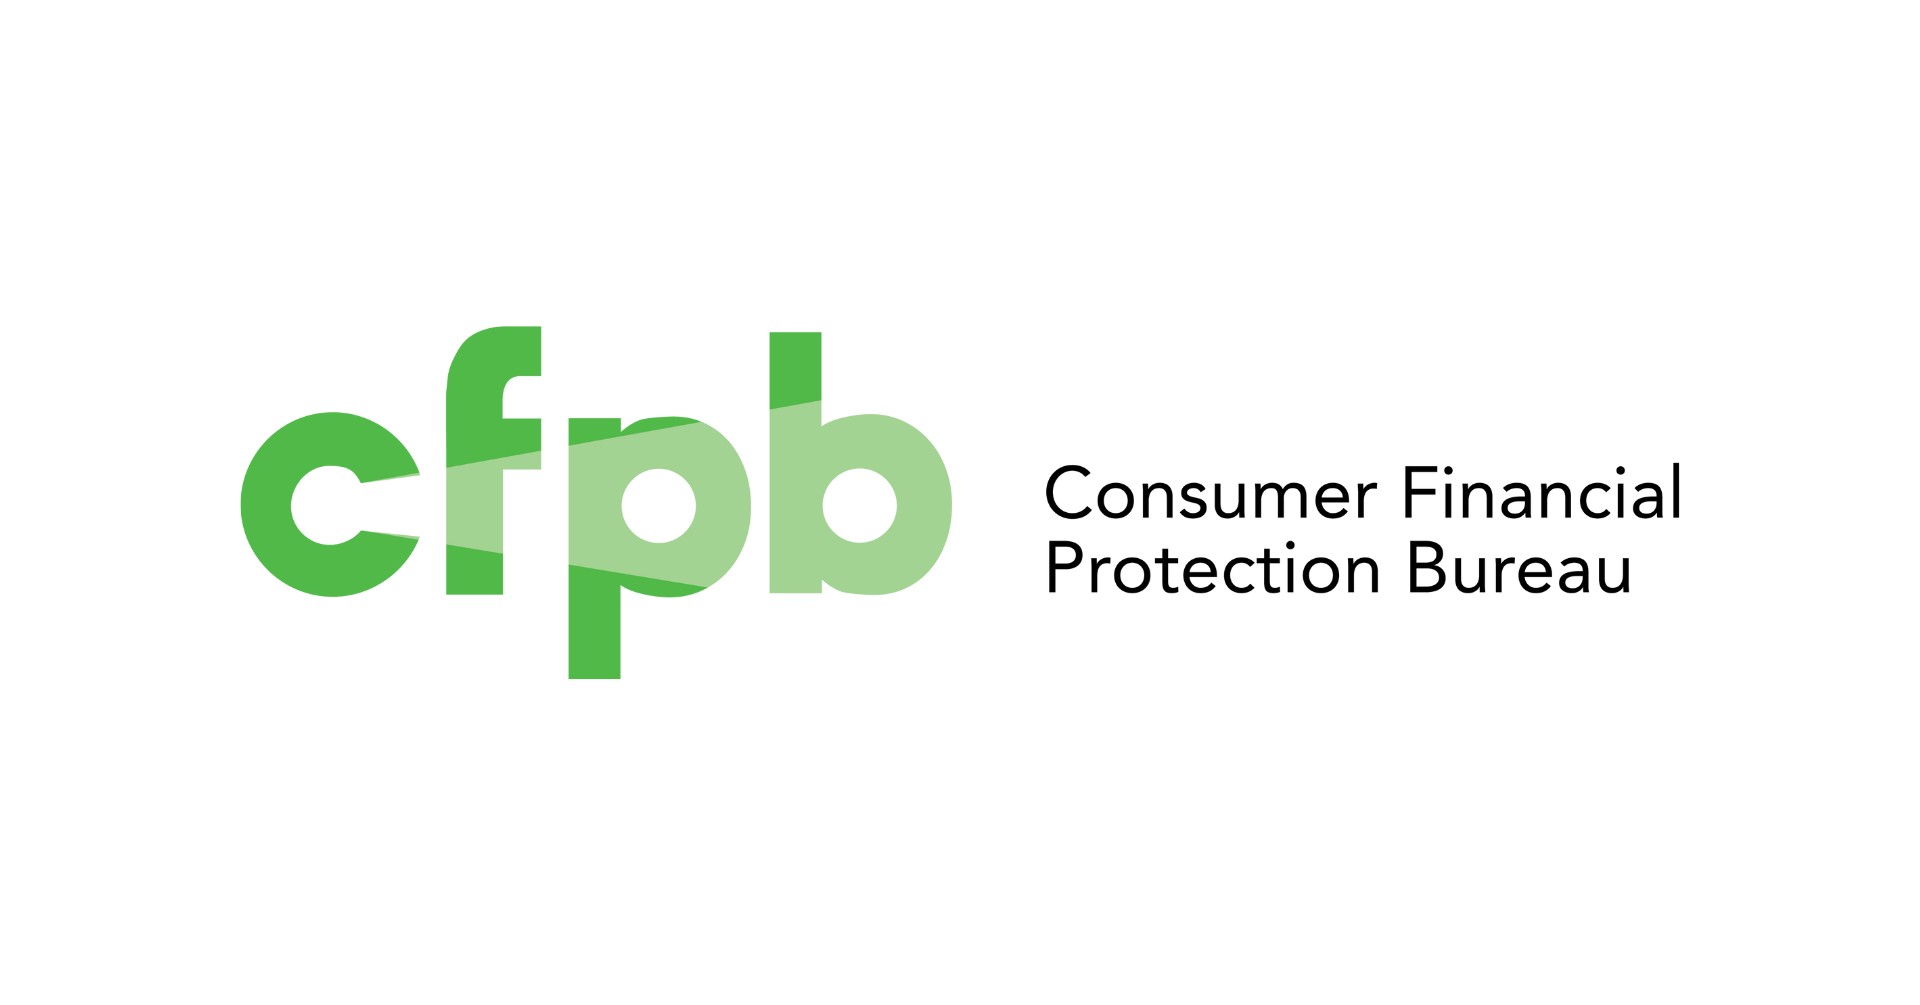 Akoya Response to CFPB Rulemaking on Personal Financial Data Rights